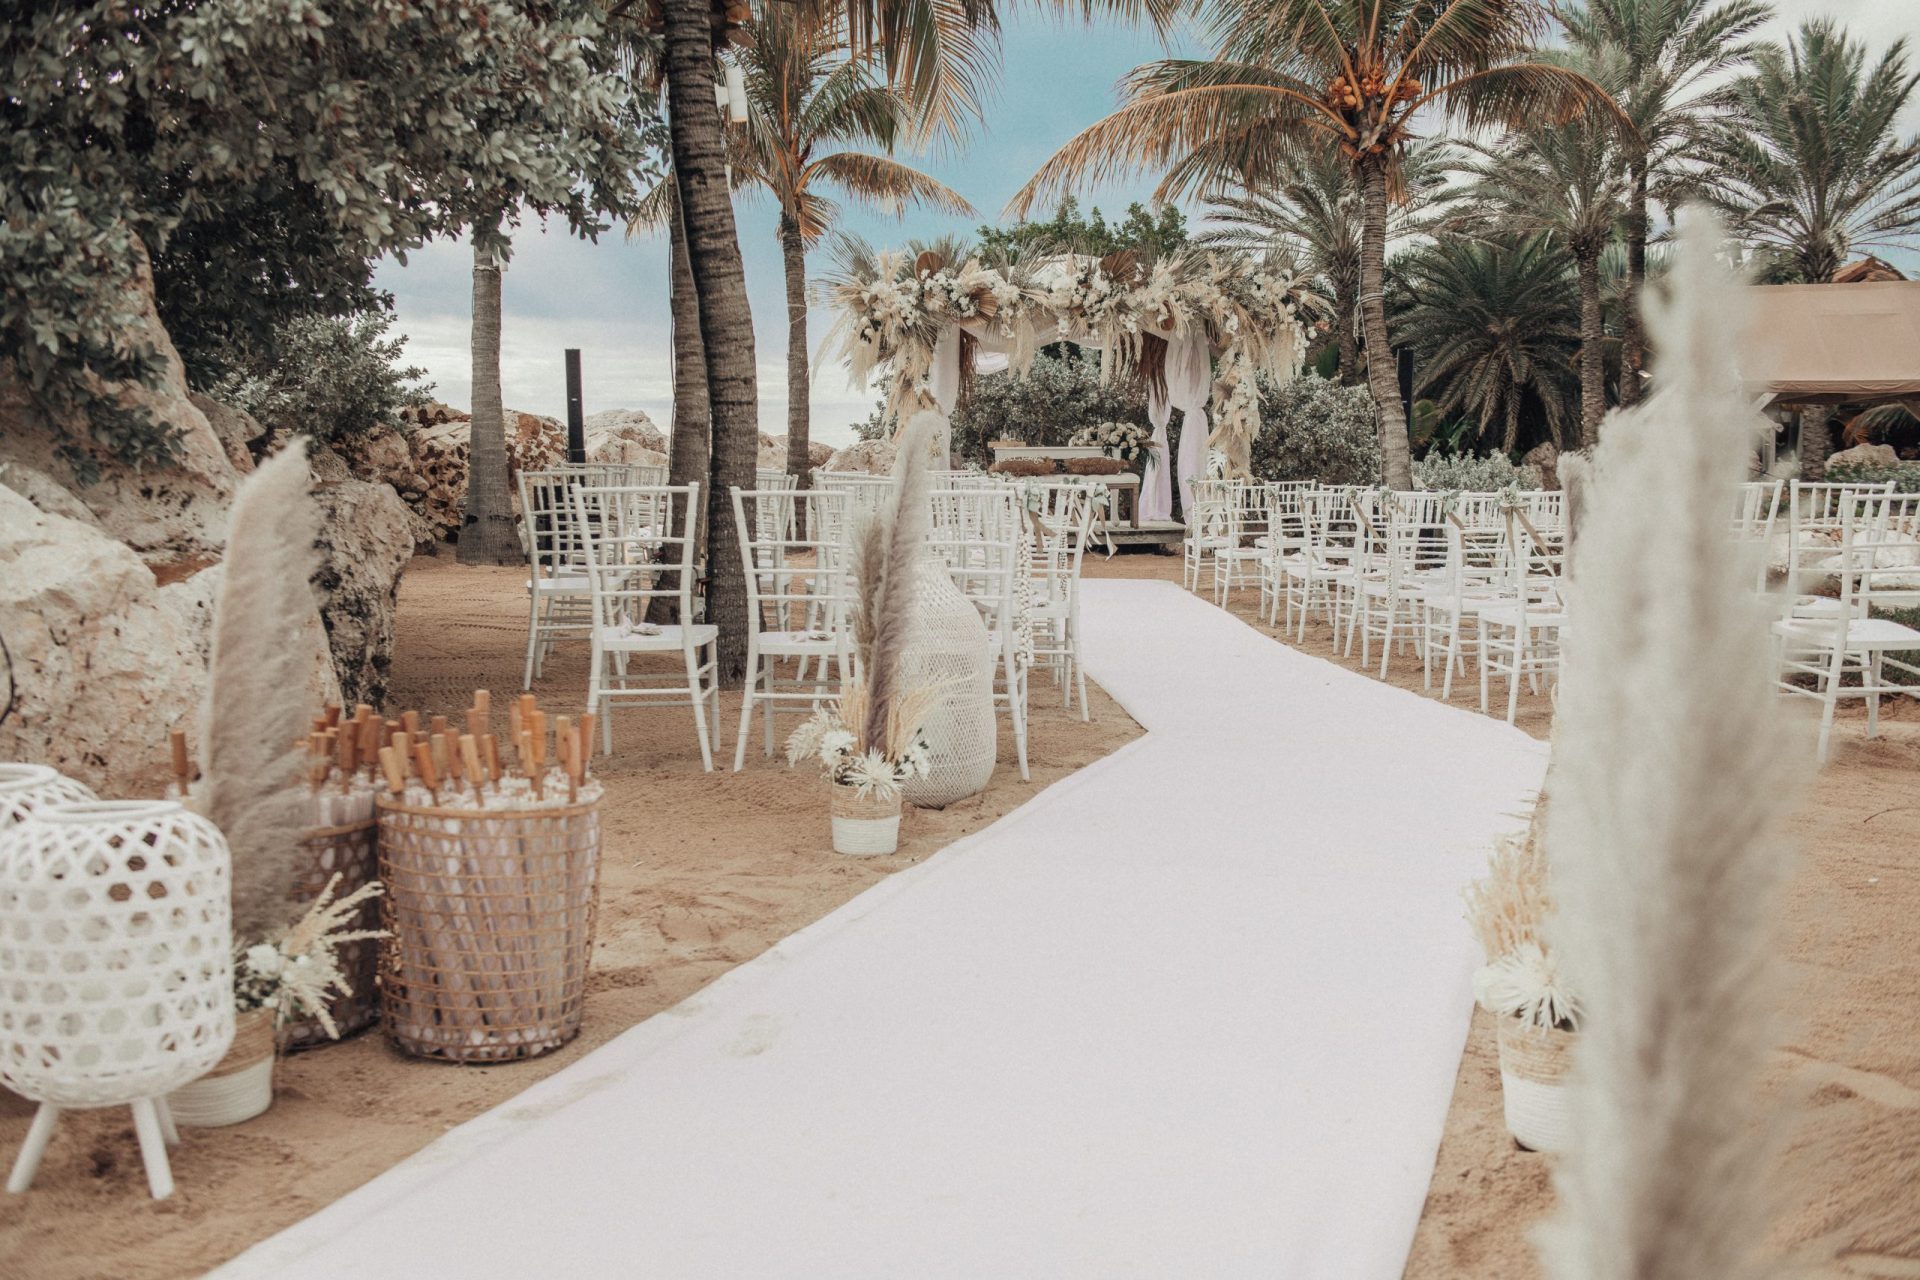 Beach area at Baoase set-up for a wedding with a wedding pergola, chairs and decoration